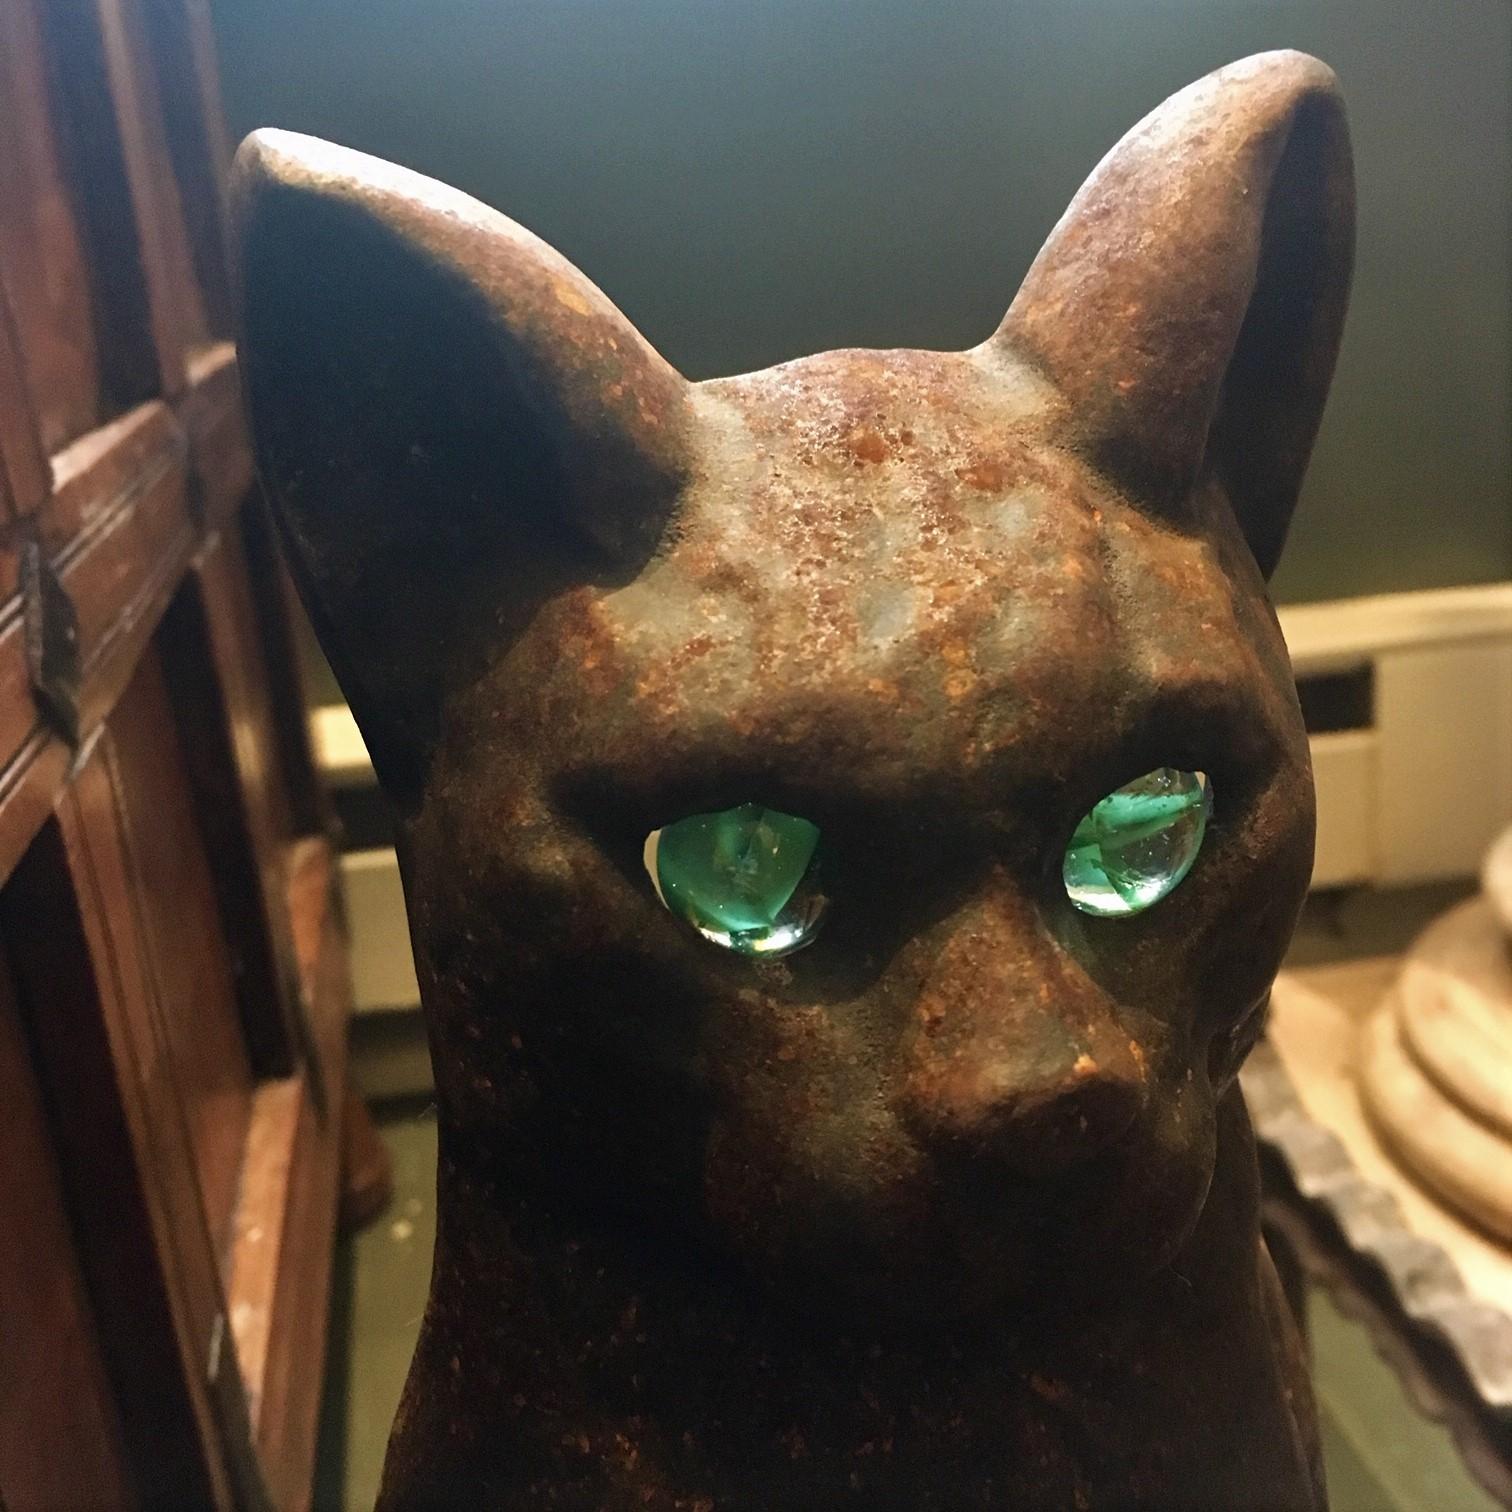 Pair of late 19th century cast iron cat andirons with light, translucent green glass eyes. The proud cats (Siamese?) sit upright on bracket bases, with log supports fitting into keystone dovetails on the back. Not signed, but method of manufacture